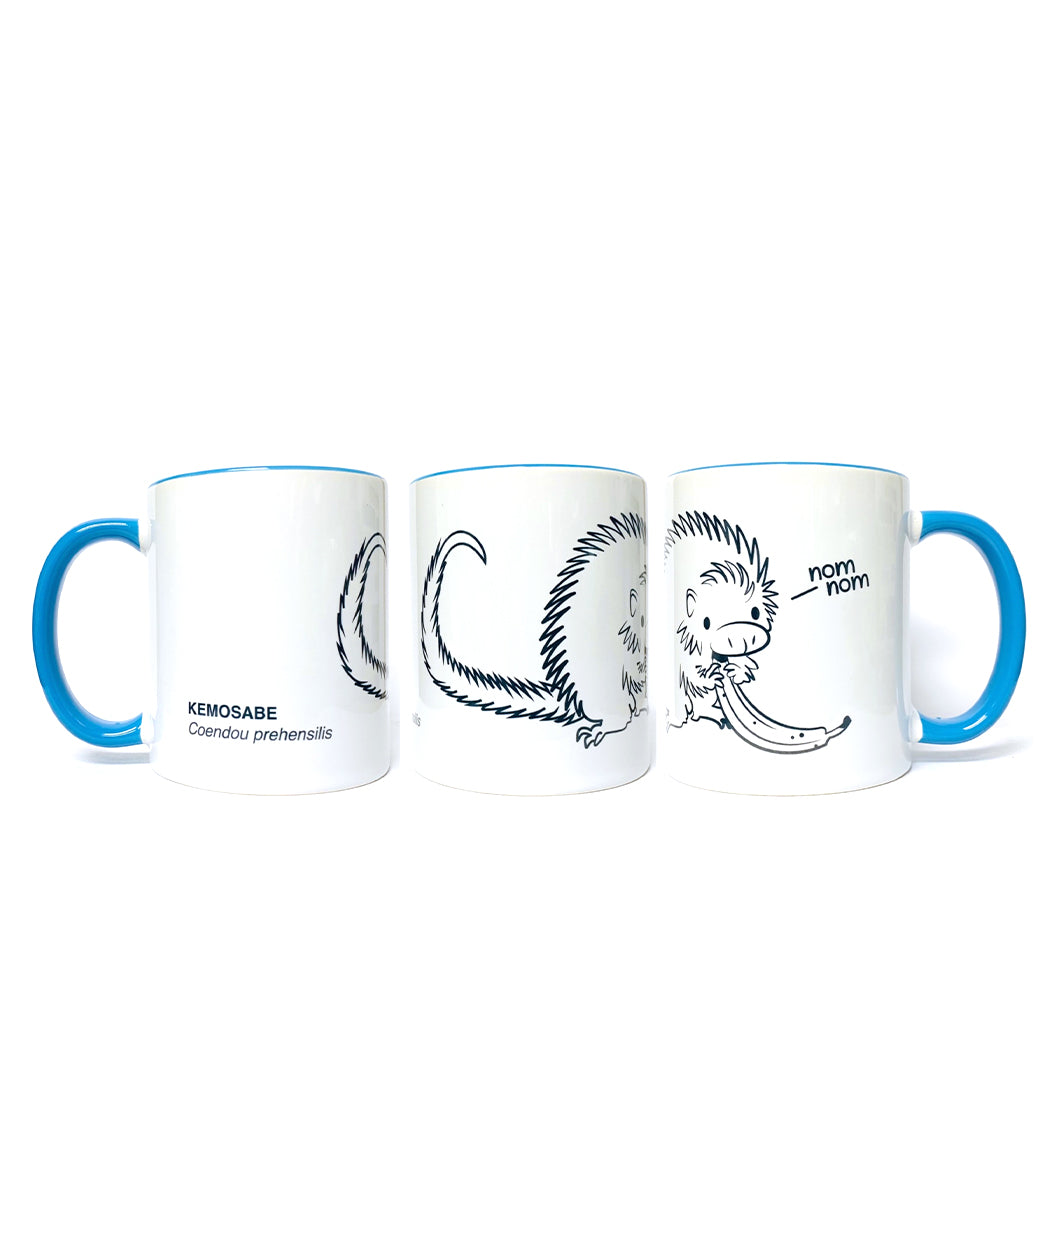 Three mugs in different positions to show design. Mug is white base with blue handle and blue inside. First: Black outline of tail of porcupine with writing on bottom left that says, “Kemosabe Coendou prehensilis” in black sans serif font. Second: Black outline drawing of porcupine with white filling eating a banana. Third: Black outline drawing of head and hands of porcupine eating a banana with, “nom nom,” in black sans serif font with a line near words coming from mouth - from Animal Wonders